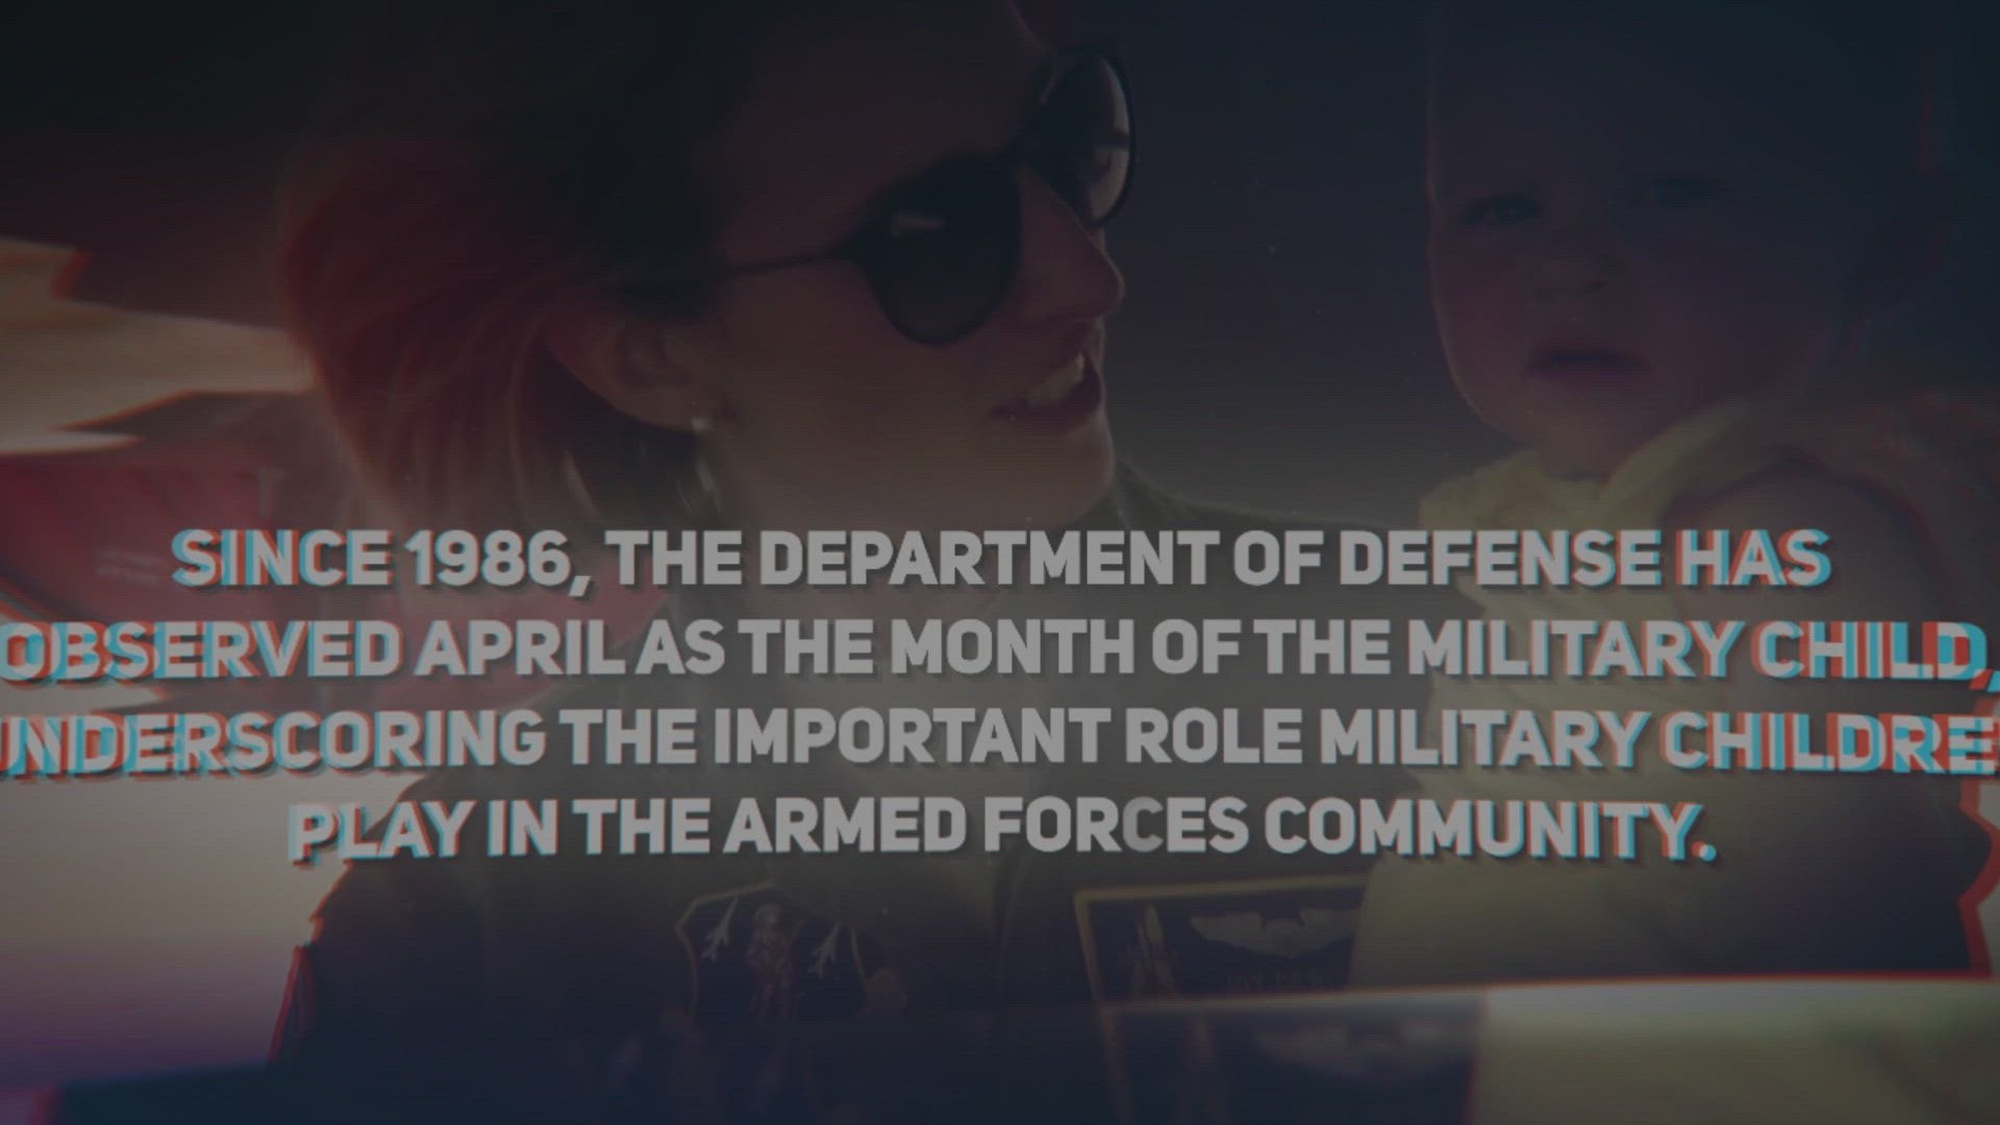 Since 1986, the Department of Defense has observed April as the Month of the Military Child, underscoring the important role military children play in the armed forces community.